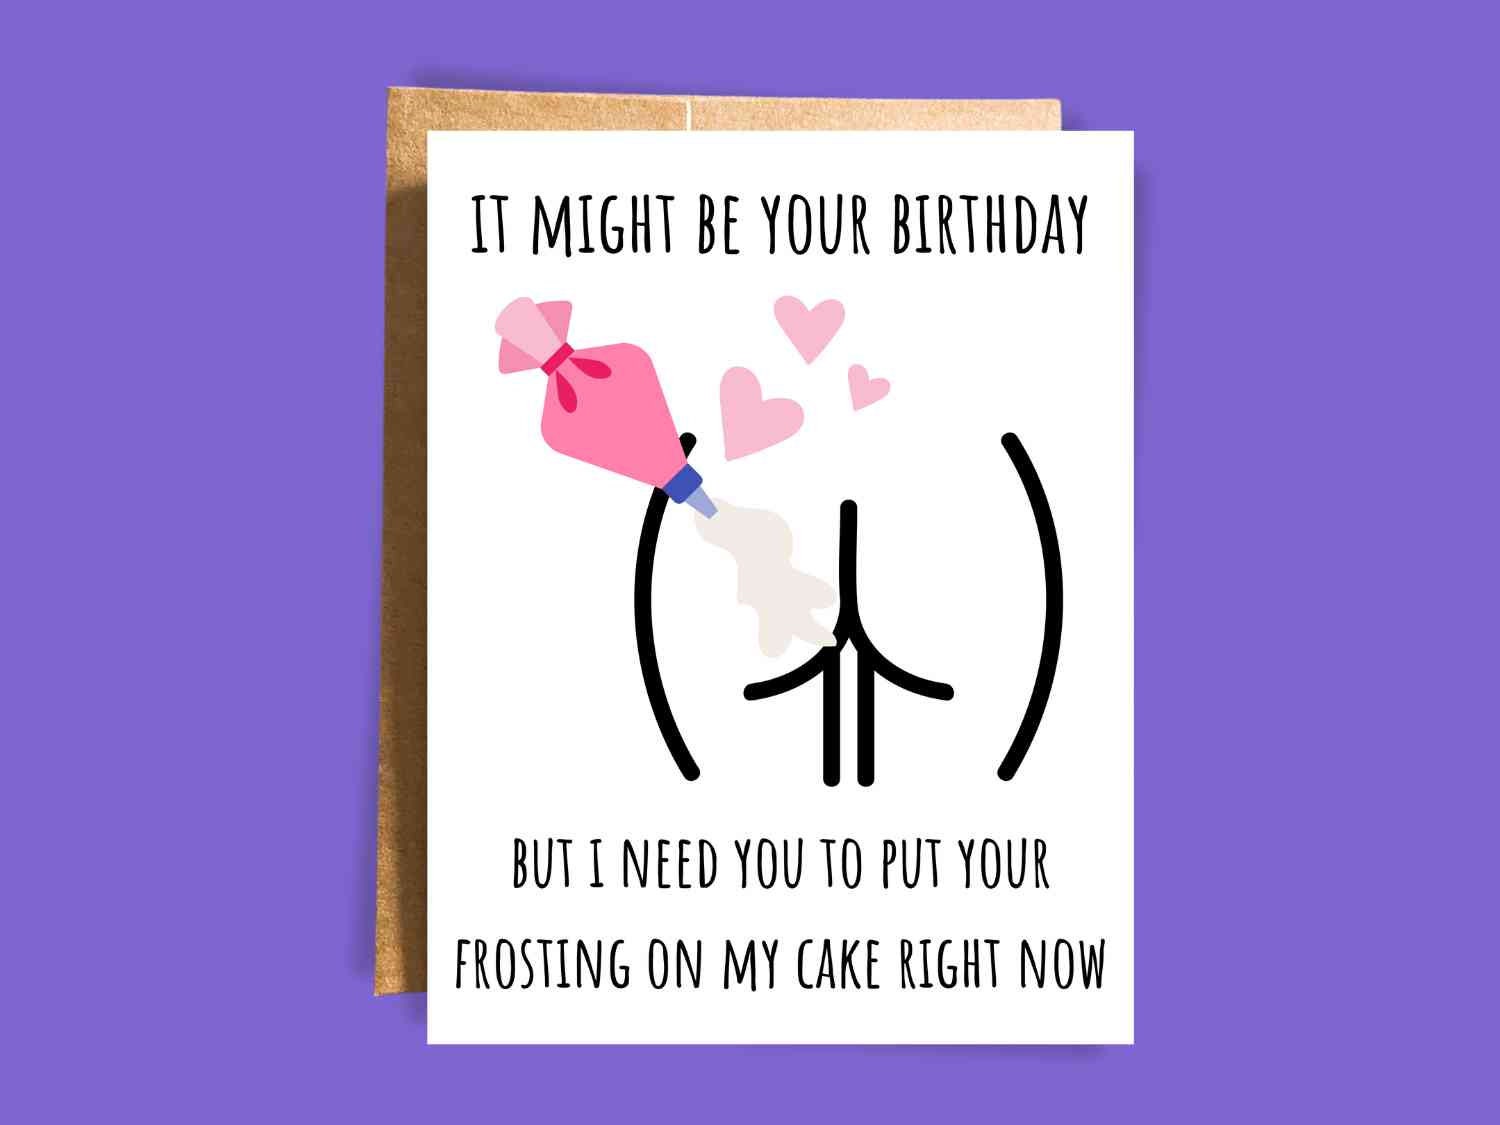 Put Your Frosting on My Cake Seductive Happy Birthday Card